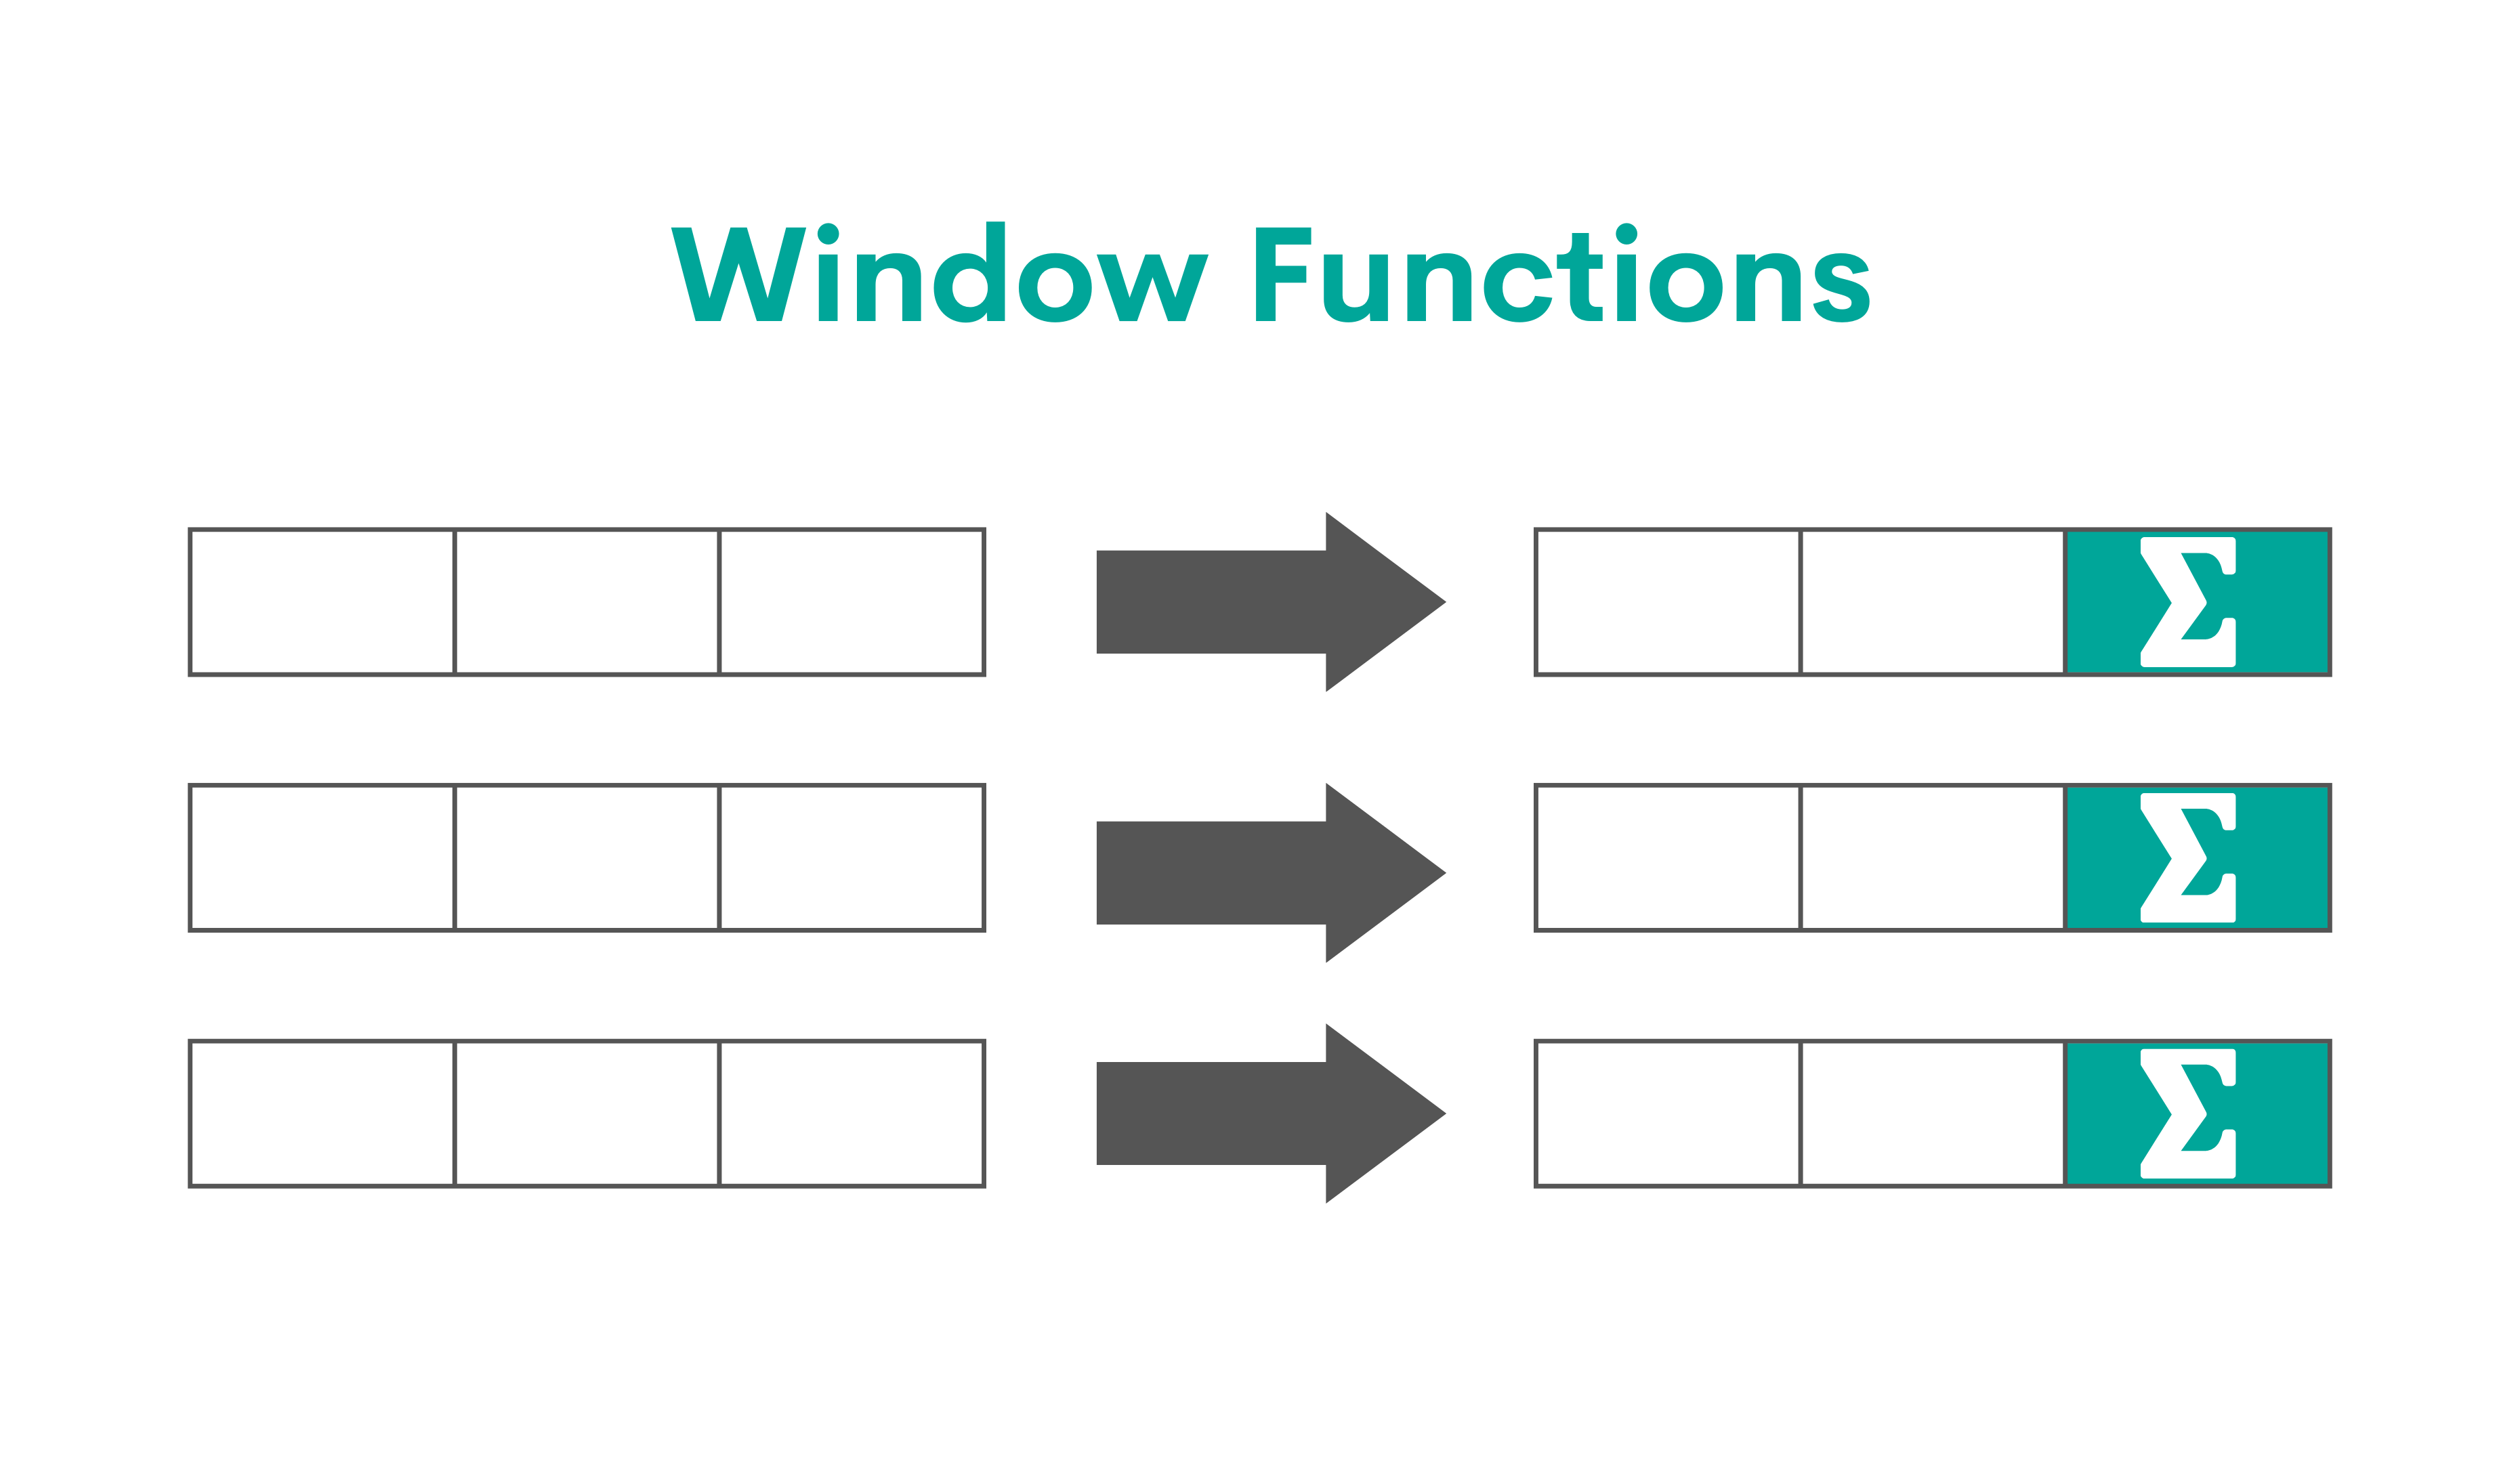 Window Functions in SQL Cheat Sheet